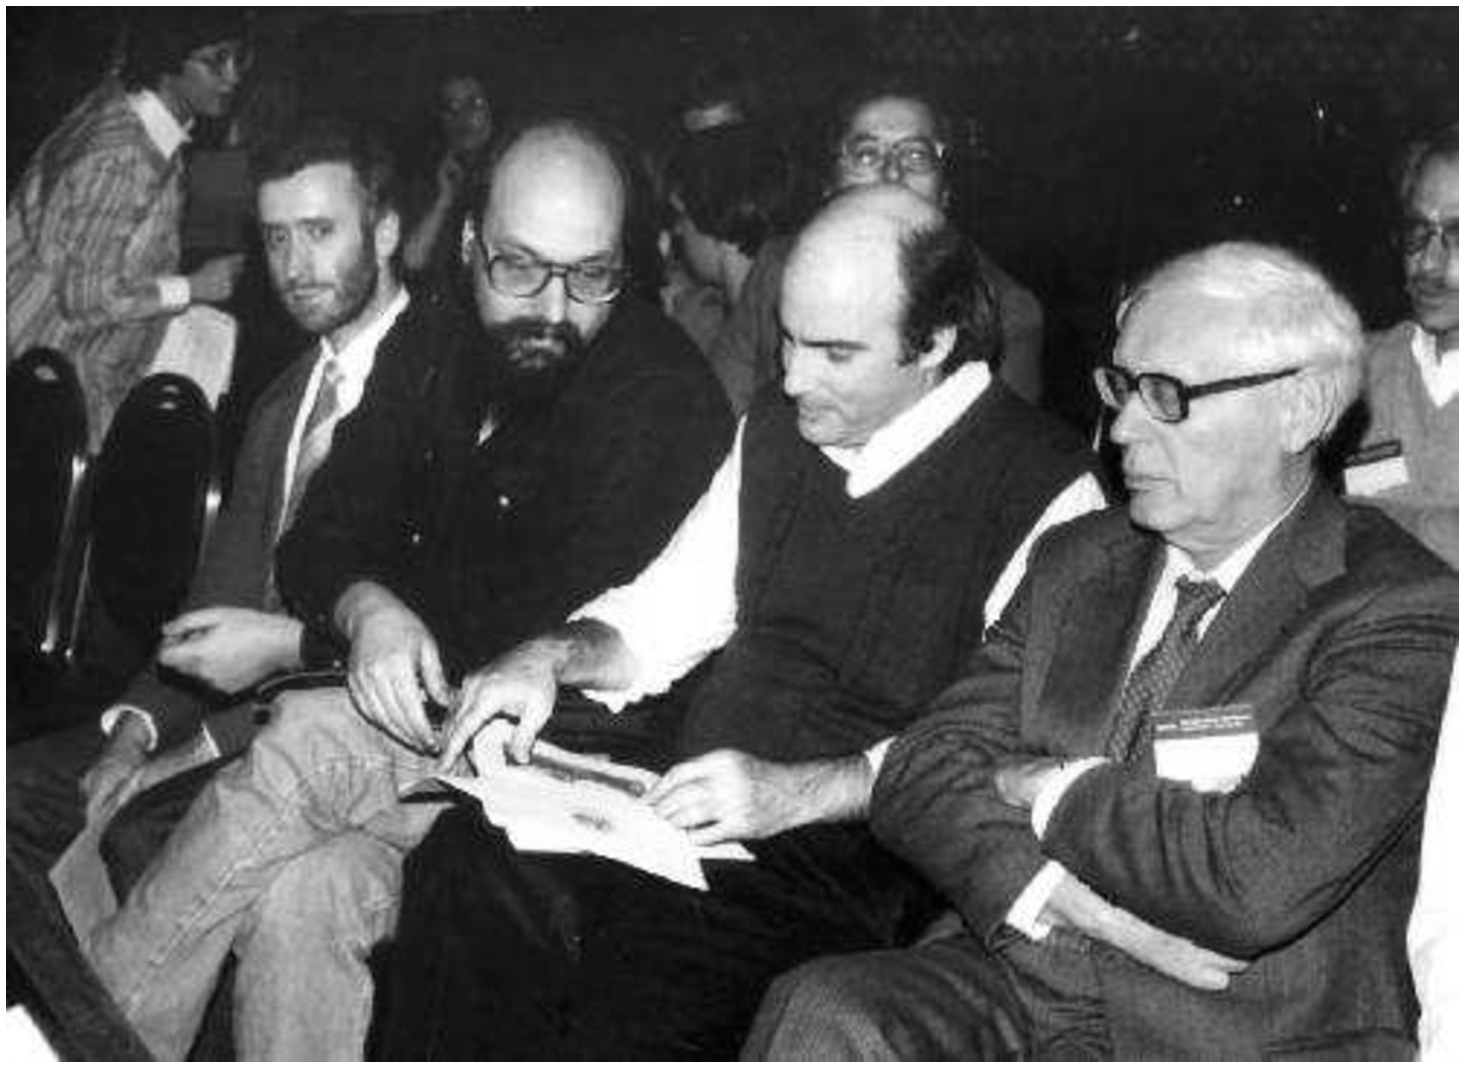 Yesterday – big trees to search. Seated from left to right: Don Beal (computer chess researcher), Ken Thompson, Monty Newborn, and Mikhail Botvinnik (former World Chess Champion). World Computer Chess Championship, New York, November 1983. Photo gifted to the Computer History Museum by Monty Newborn.